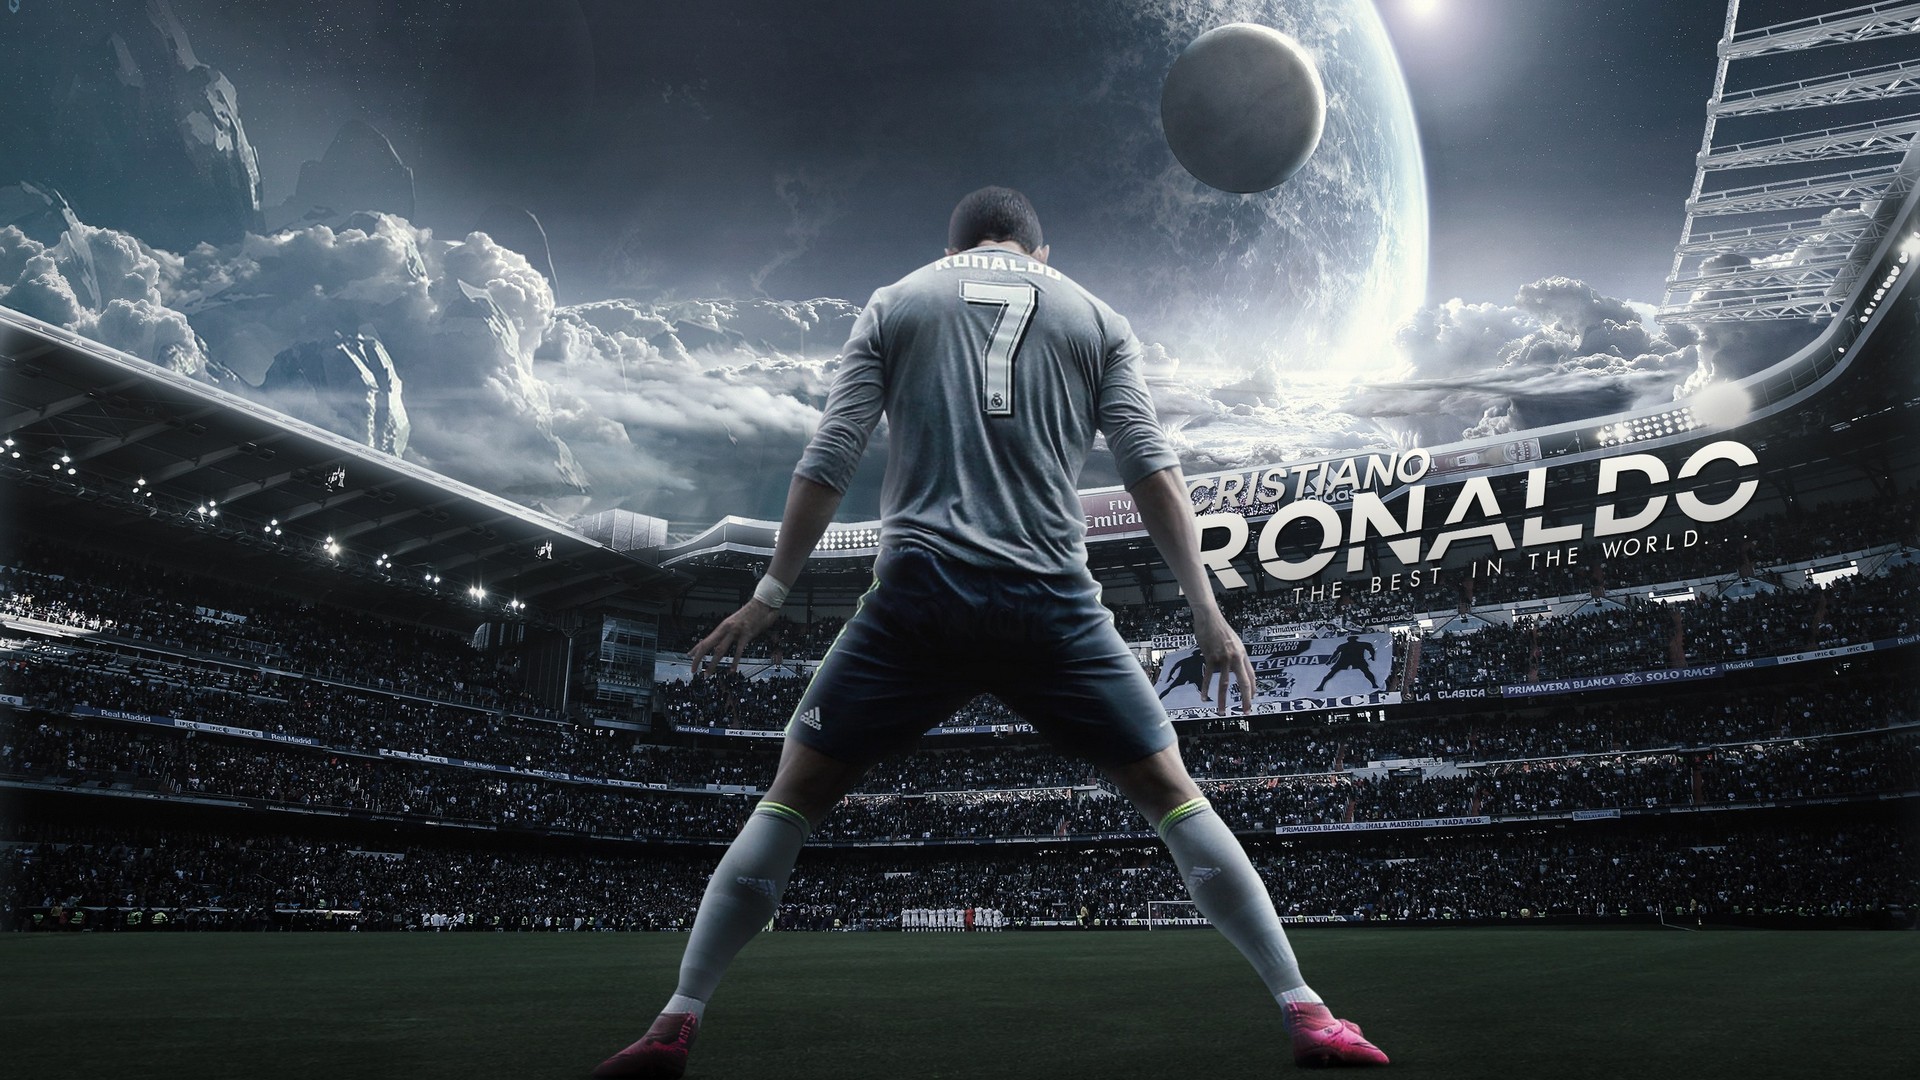 Cristiano Ronaldo Juventus Wallpaper HD with image resolution 1920x1080 pixel. You can make this wallpaper for your Desktop Computer Backgrounds, Mac Wallpapers, Android Lock screen or iPhone Screensavers